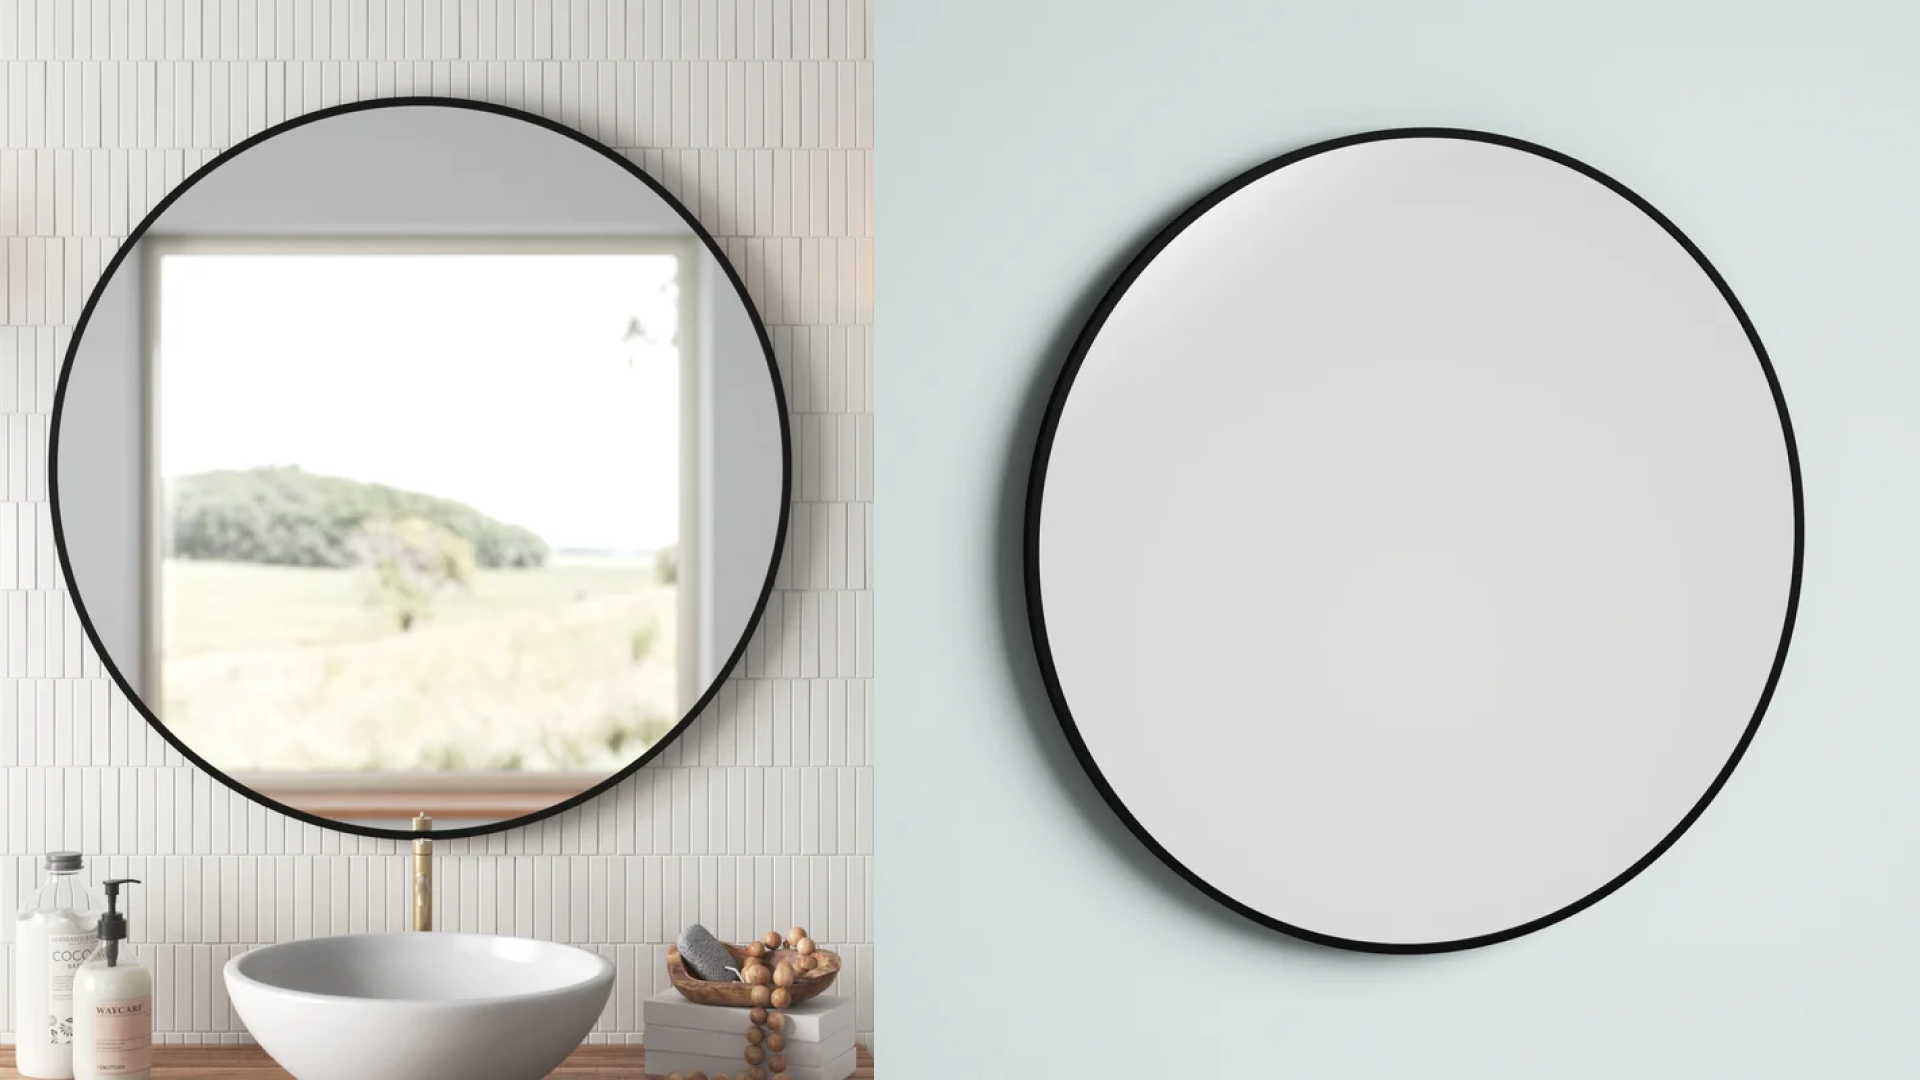 A rounded mirror